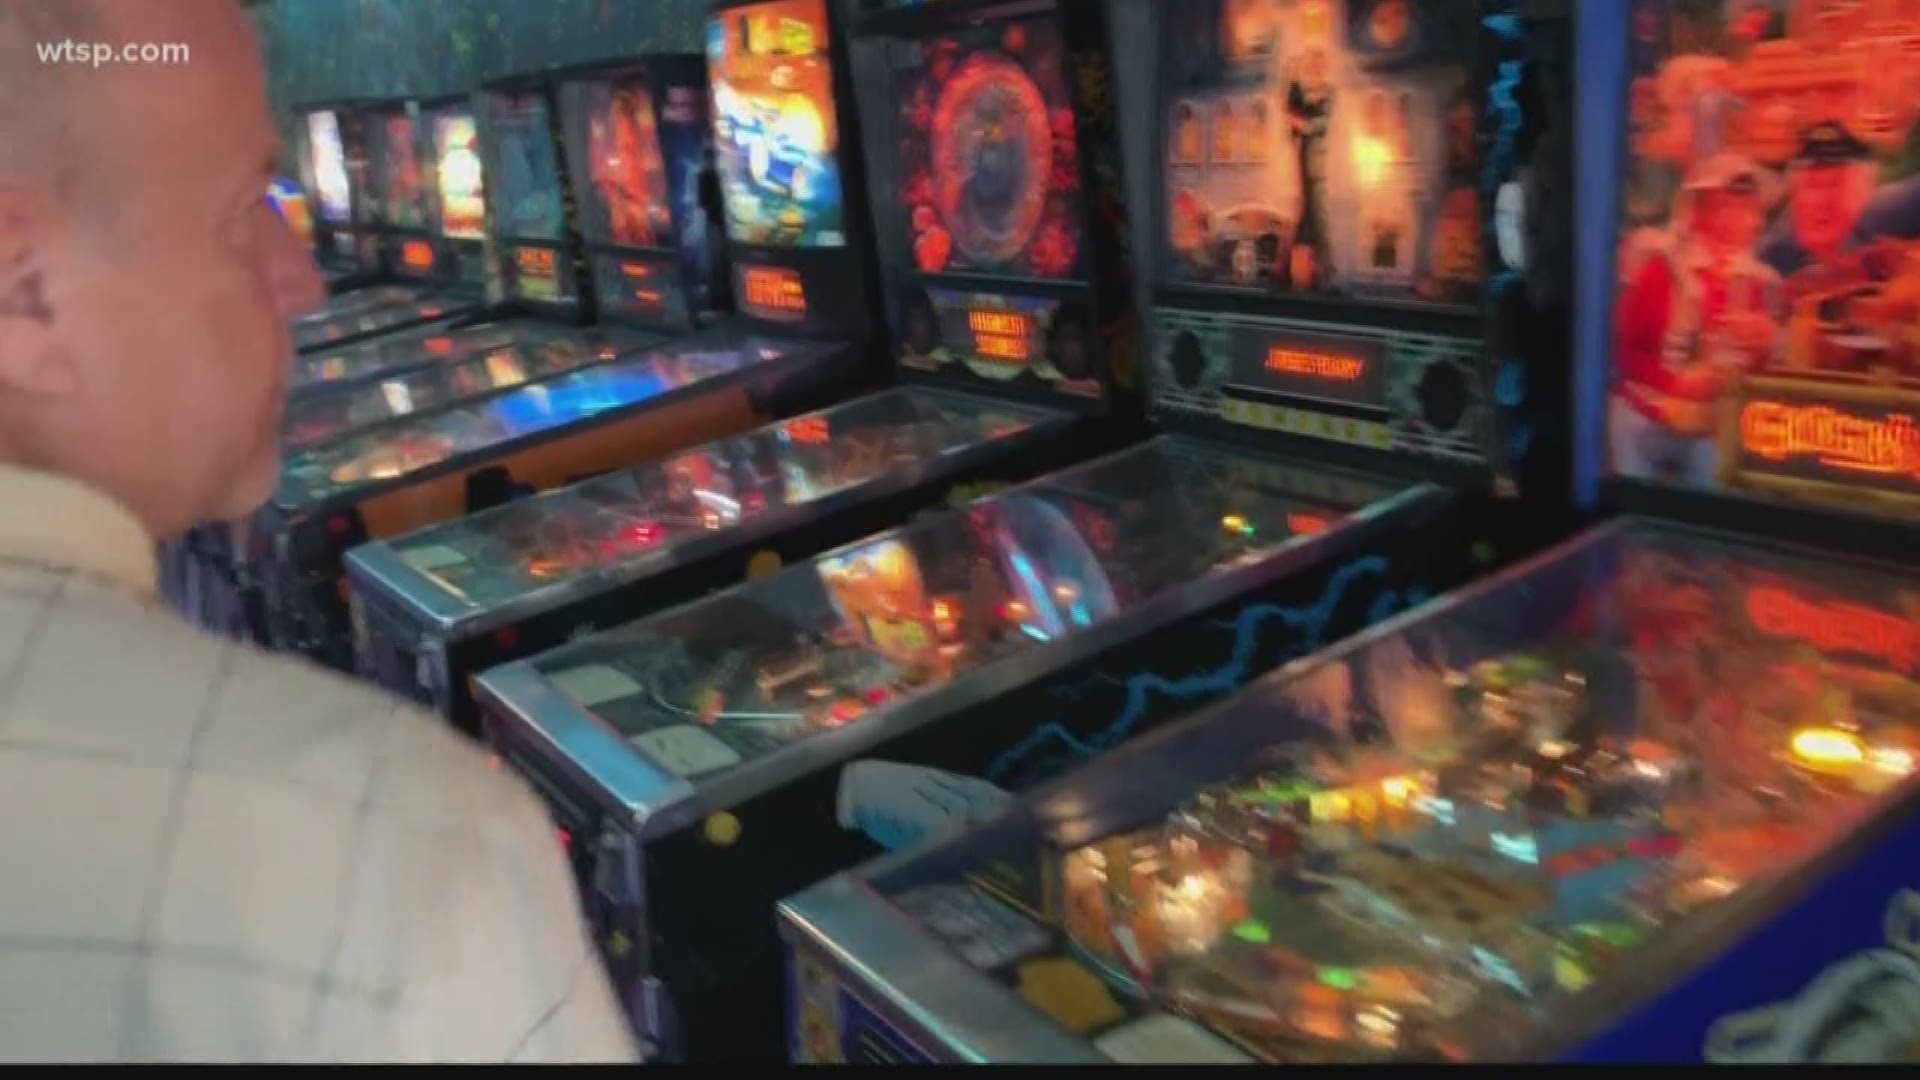 There's a new museum coming to St. Petersburg, and its art is more of the coin-operated variety.

The Pinball Arcade Museum will open on Thursday at 2313 Central Ave. in the Grand Central District of downtown.